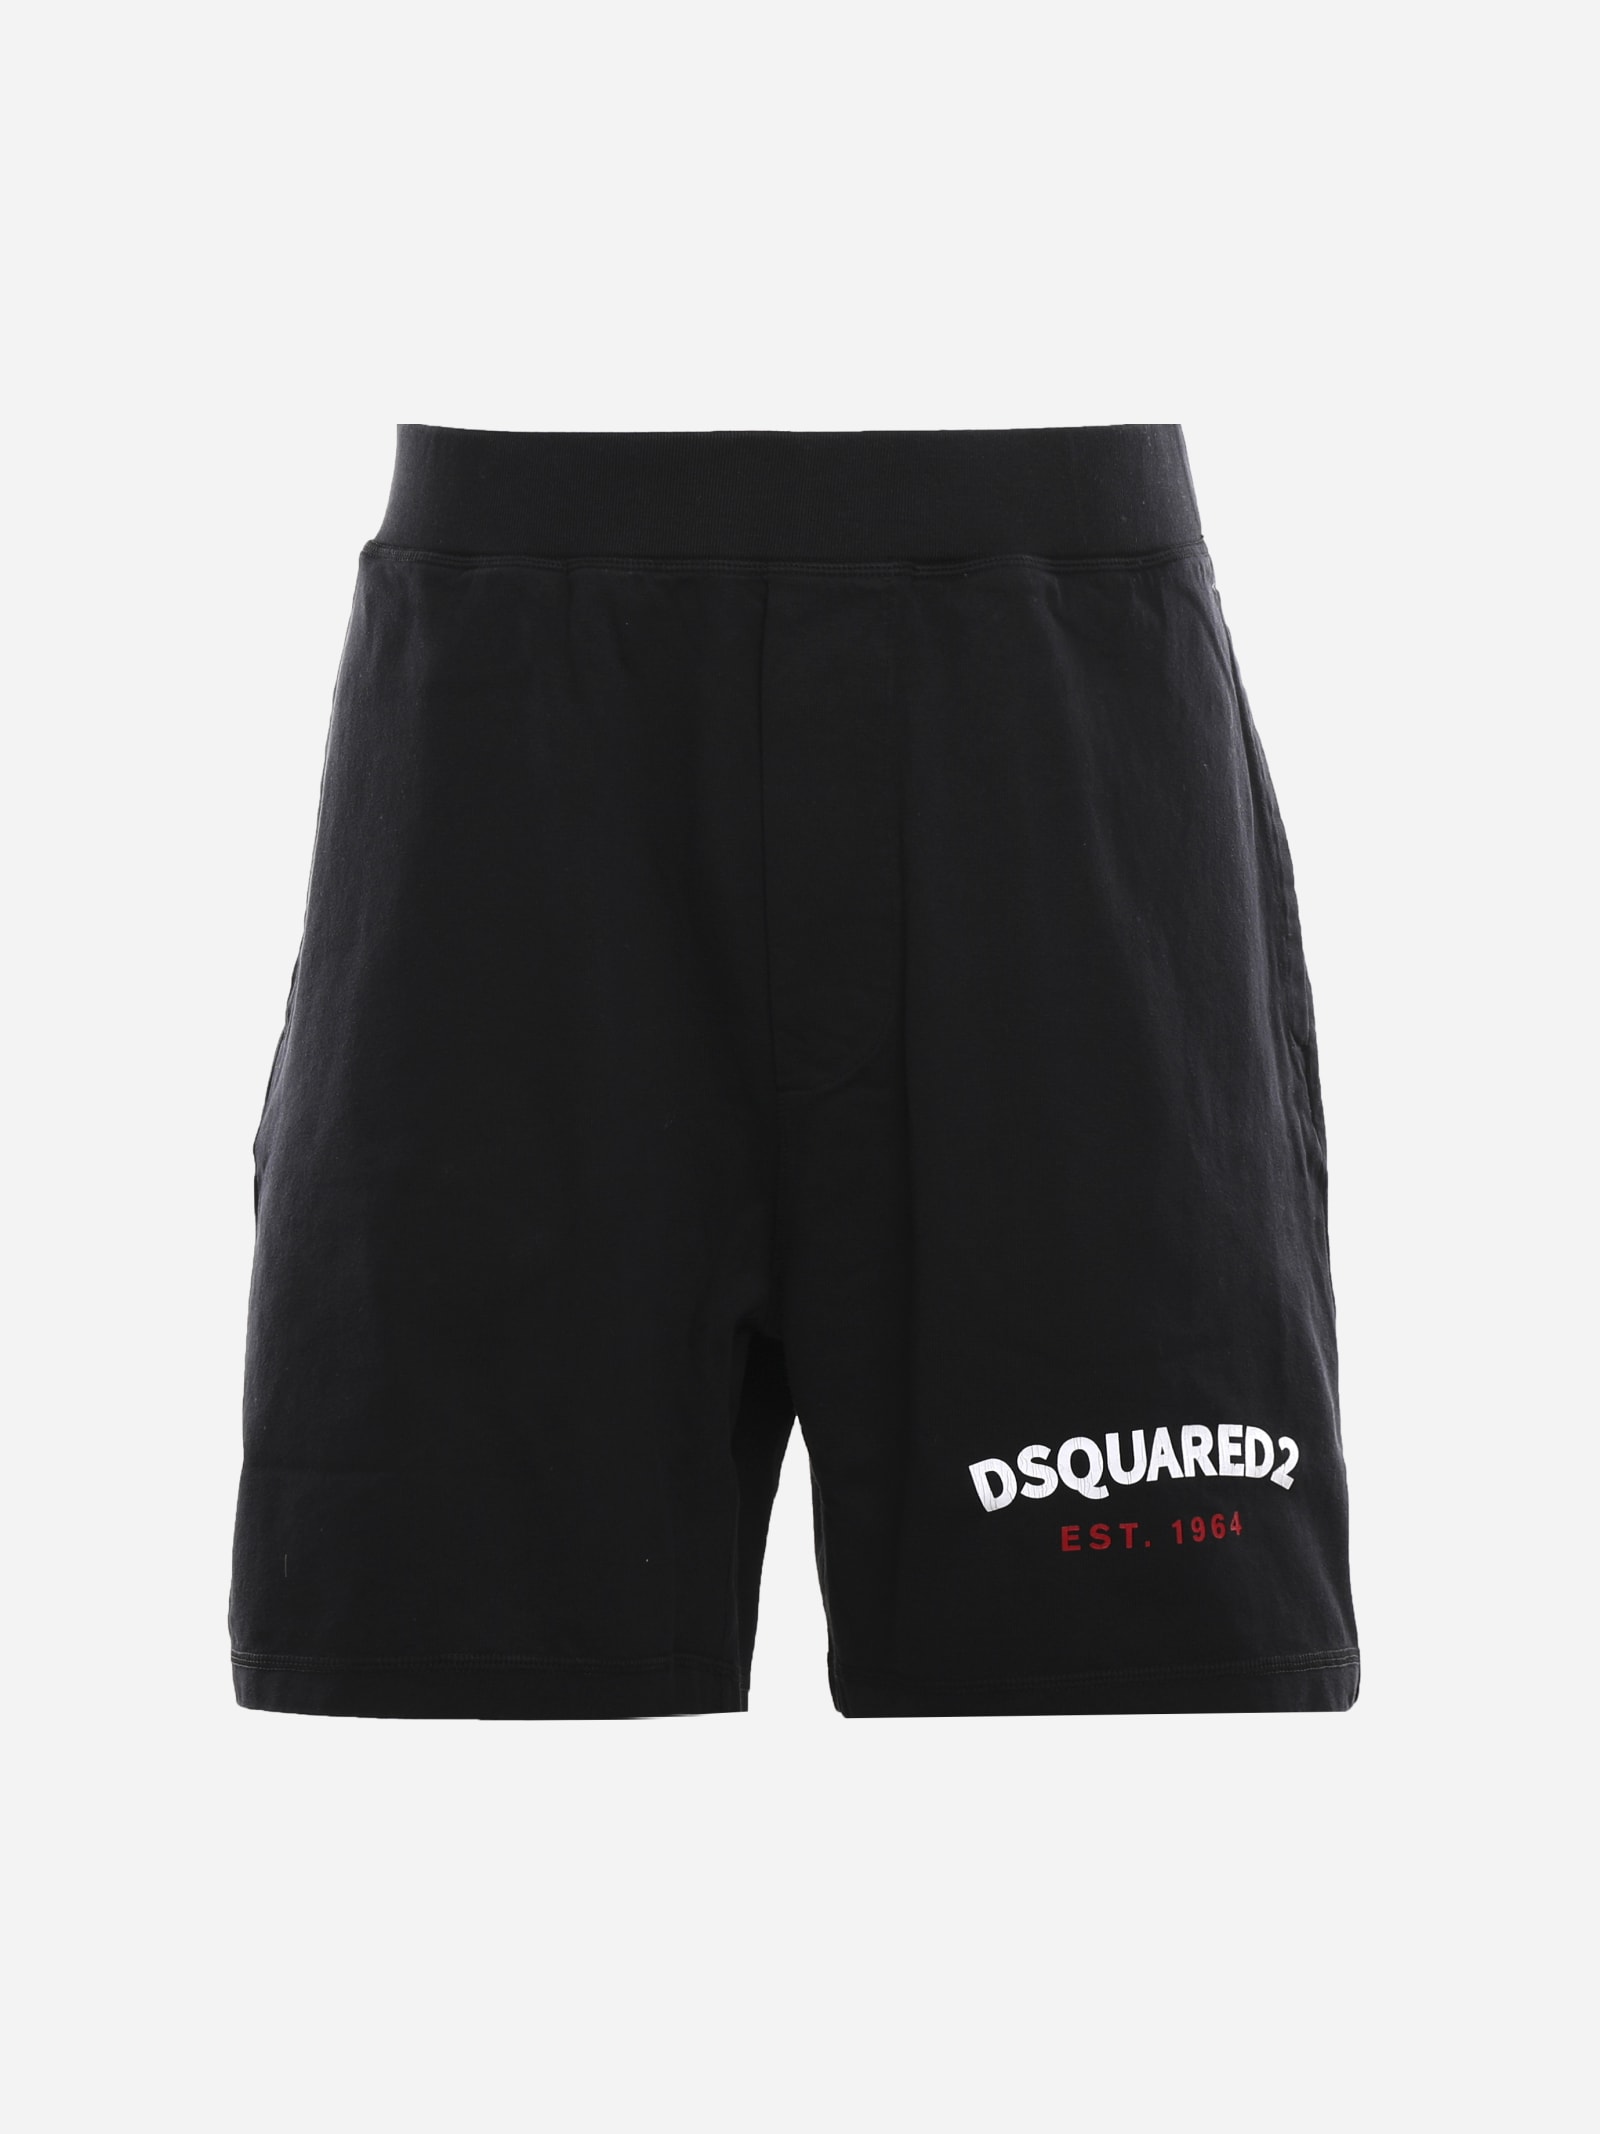 DSQUARED2 COTTON SHORTS WITH LOGO PRINT,S71MU0622 S23851900